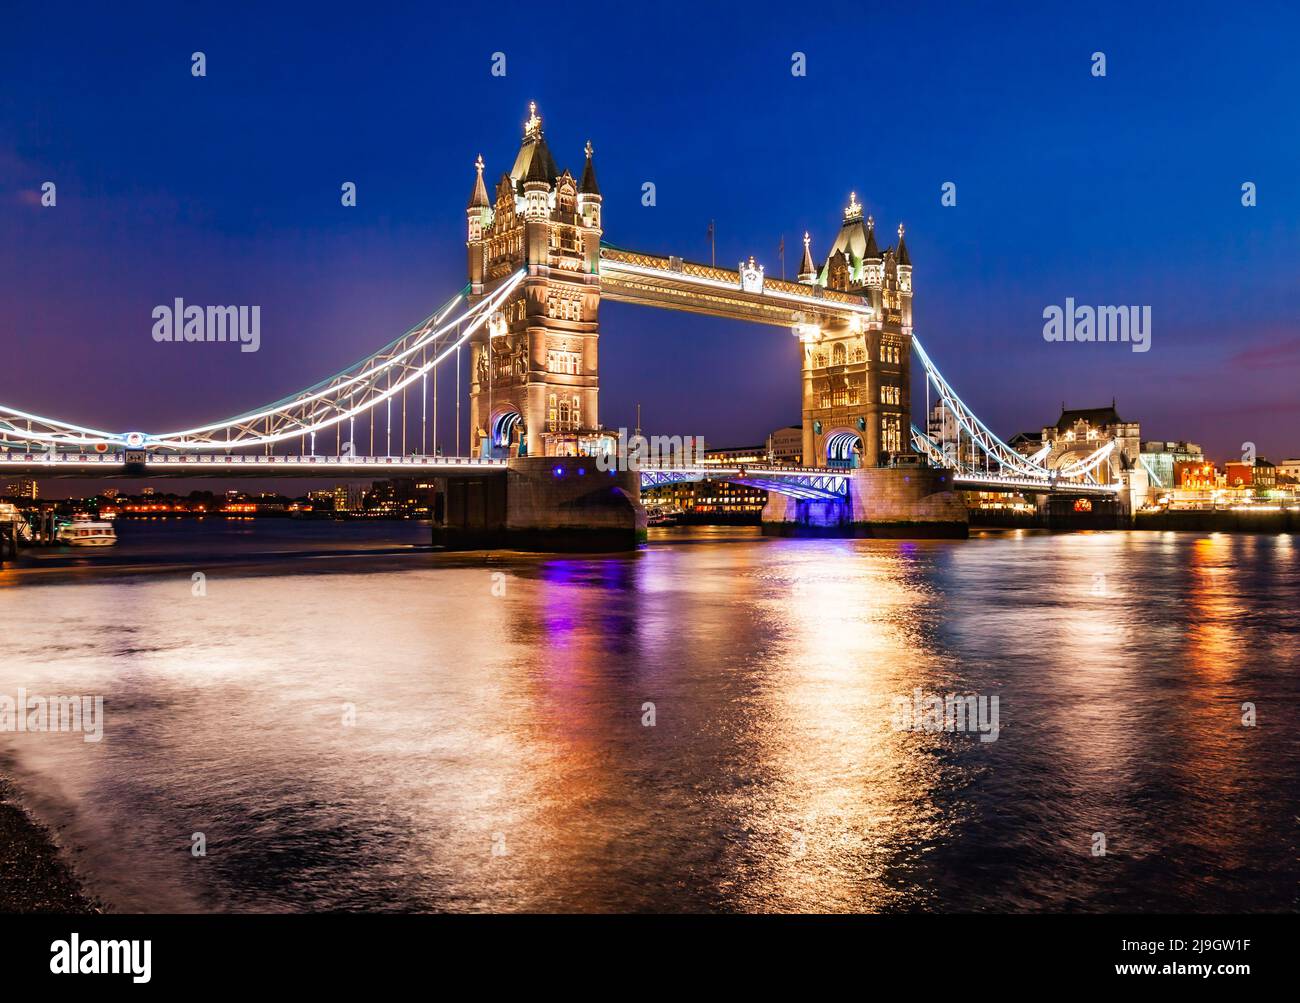 An iconic symbol of London, the Tower Bridge, as viewed from Shad Thames at night Stock Photo